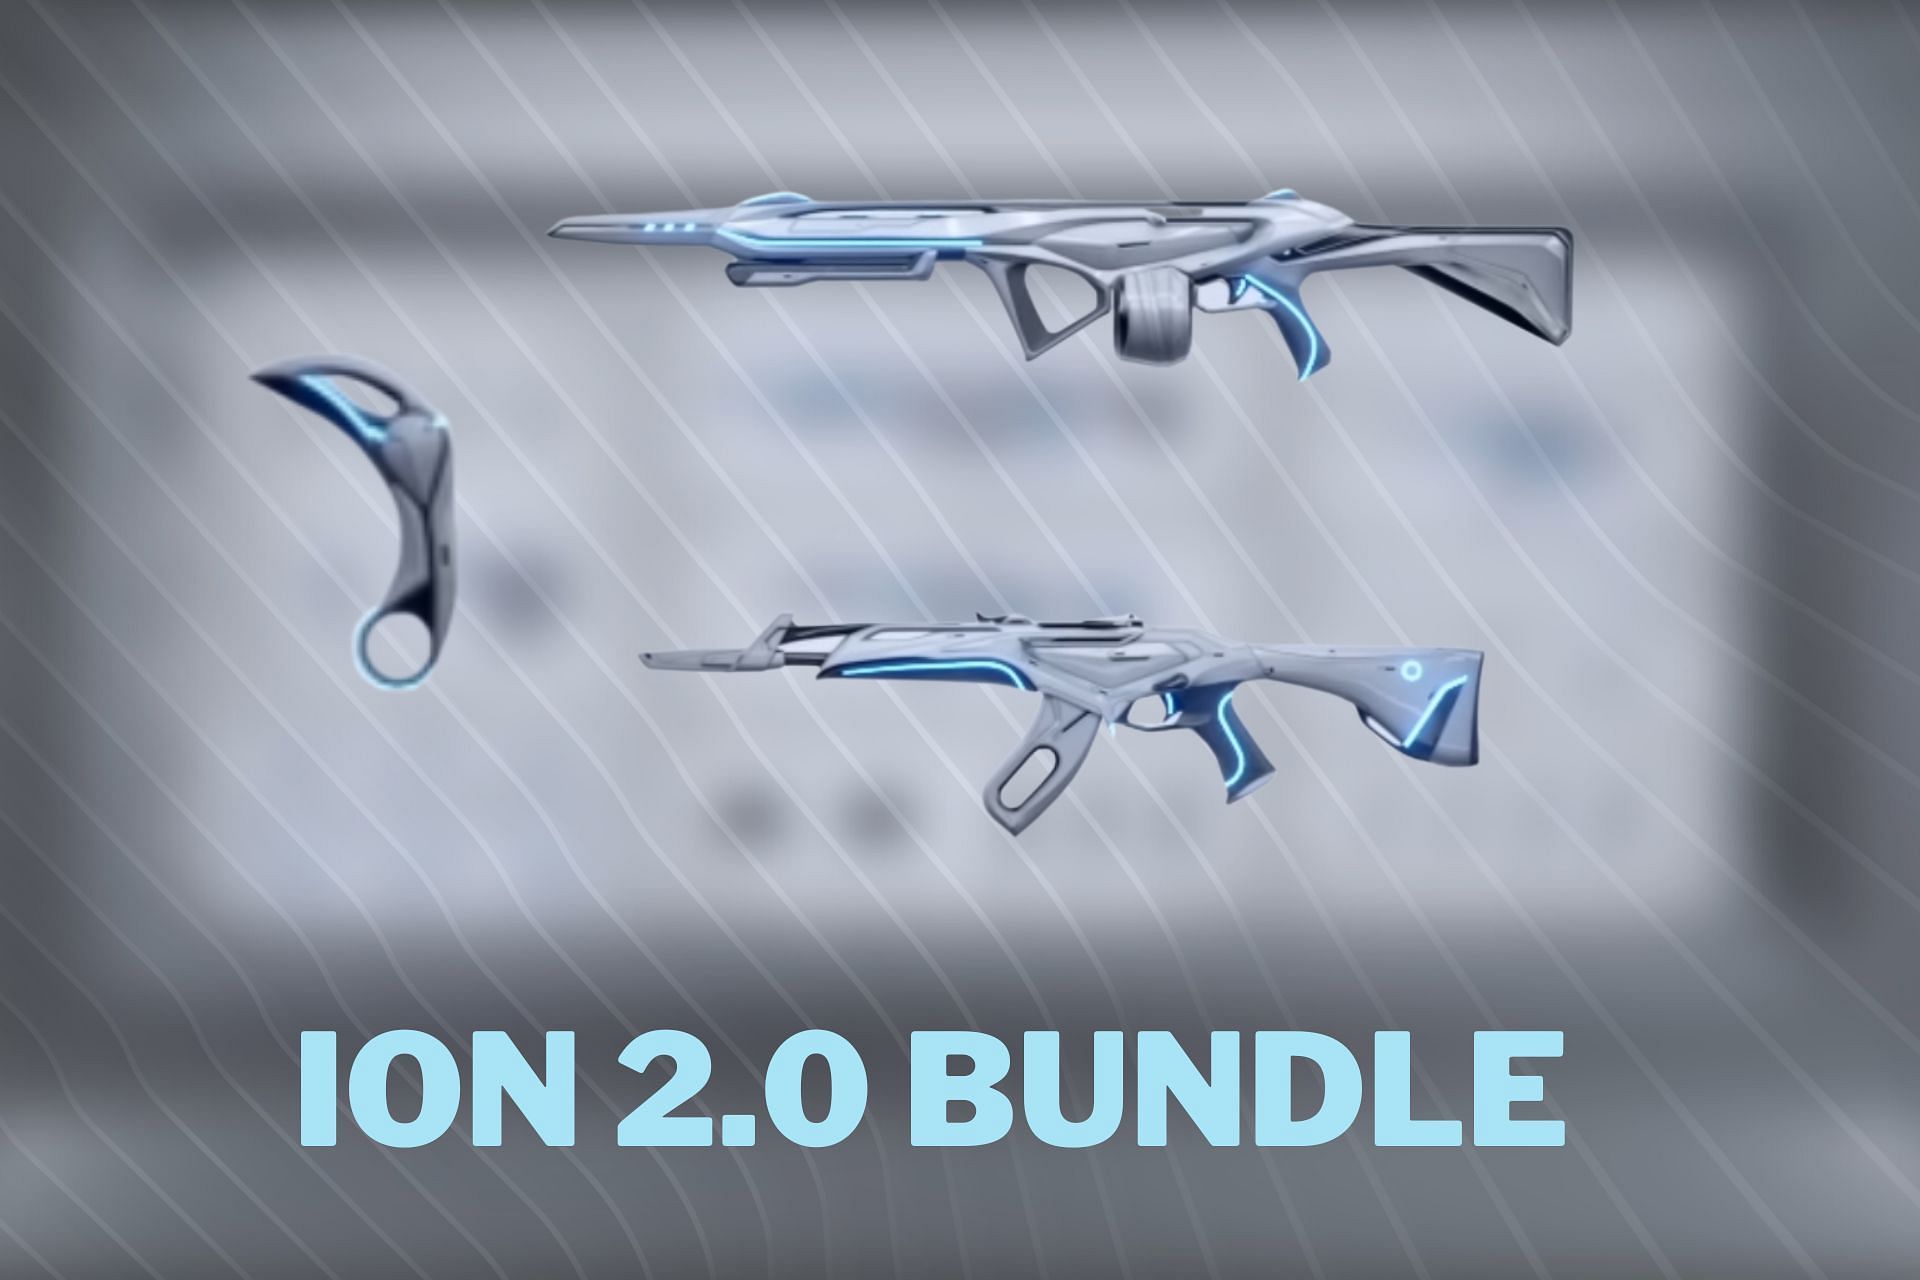 Ion 2.0 bundle is coming to the Valorant store with Episode 5 Act 3 (Image via Sportskeeda)